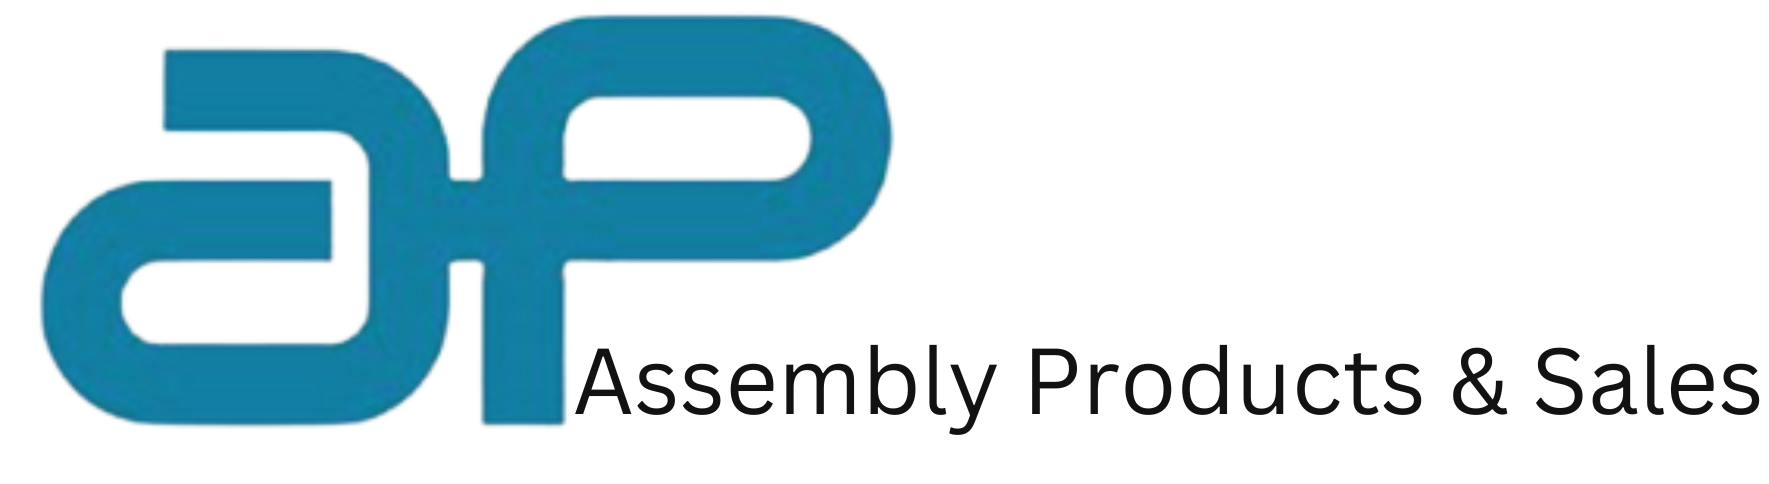 Assembly Products and Sales logo